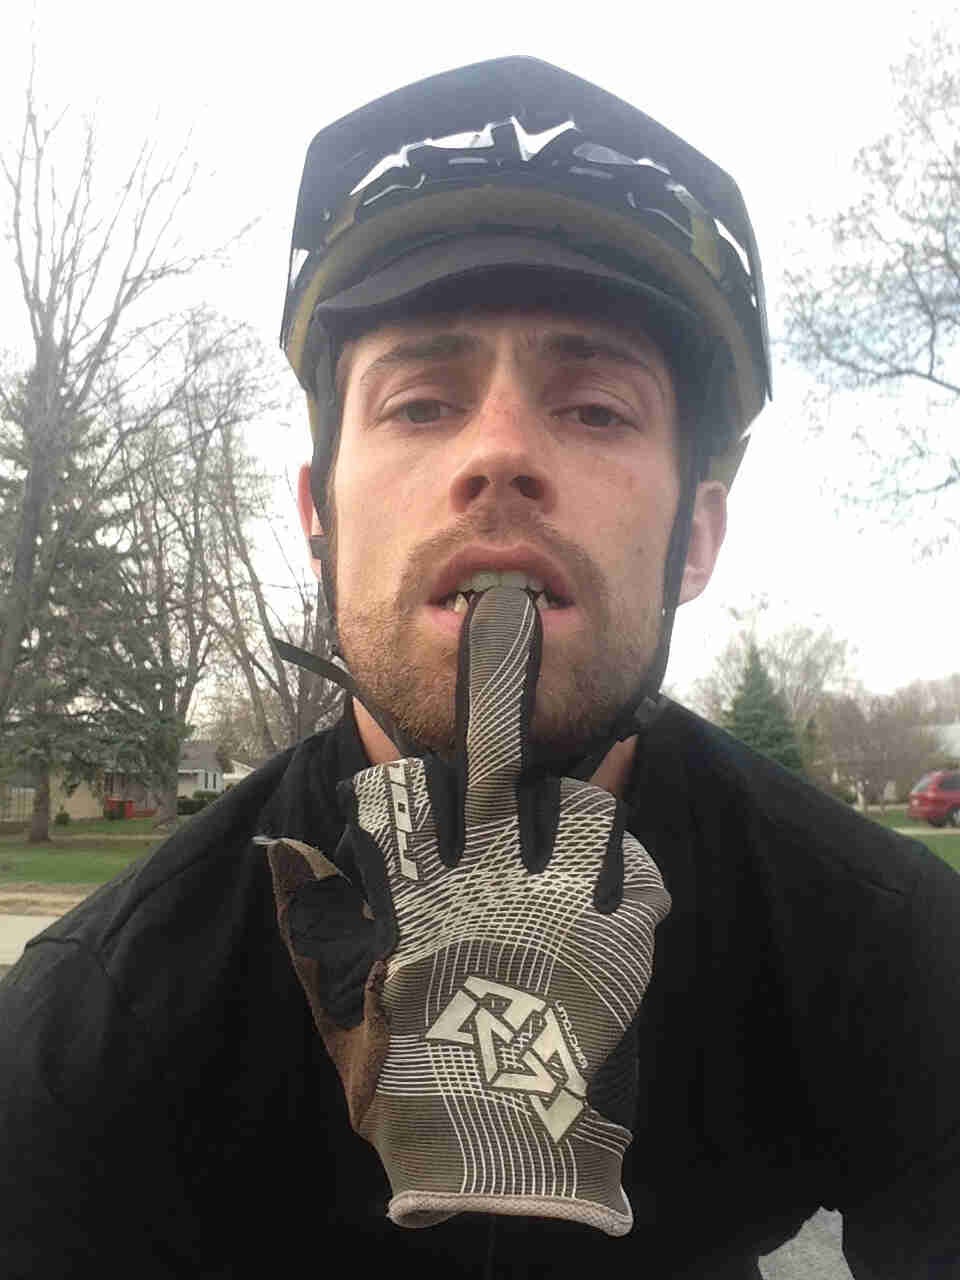 Headshot of a person, wearing a bike helmet, biting the middle finger of a glove